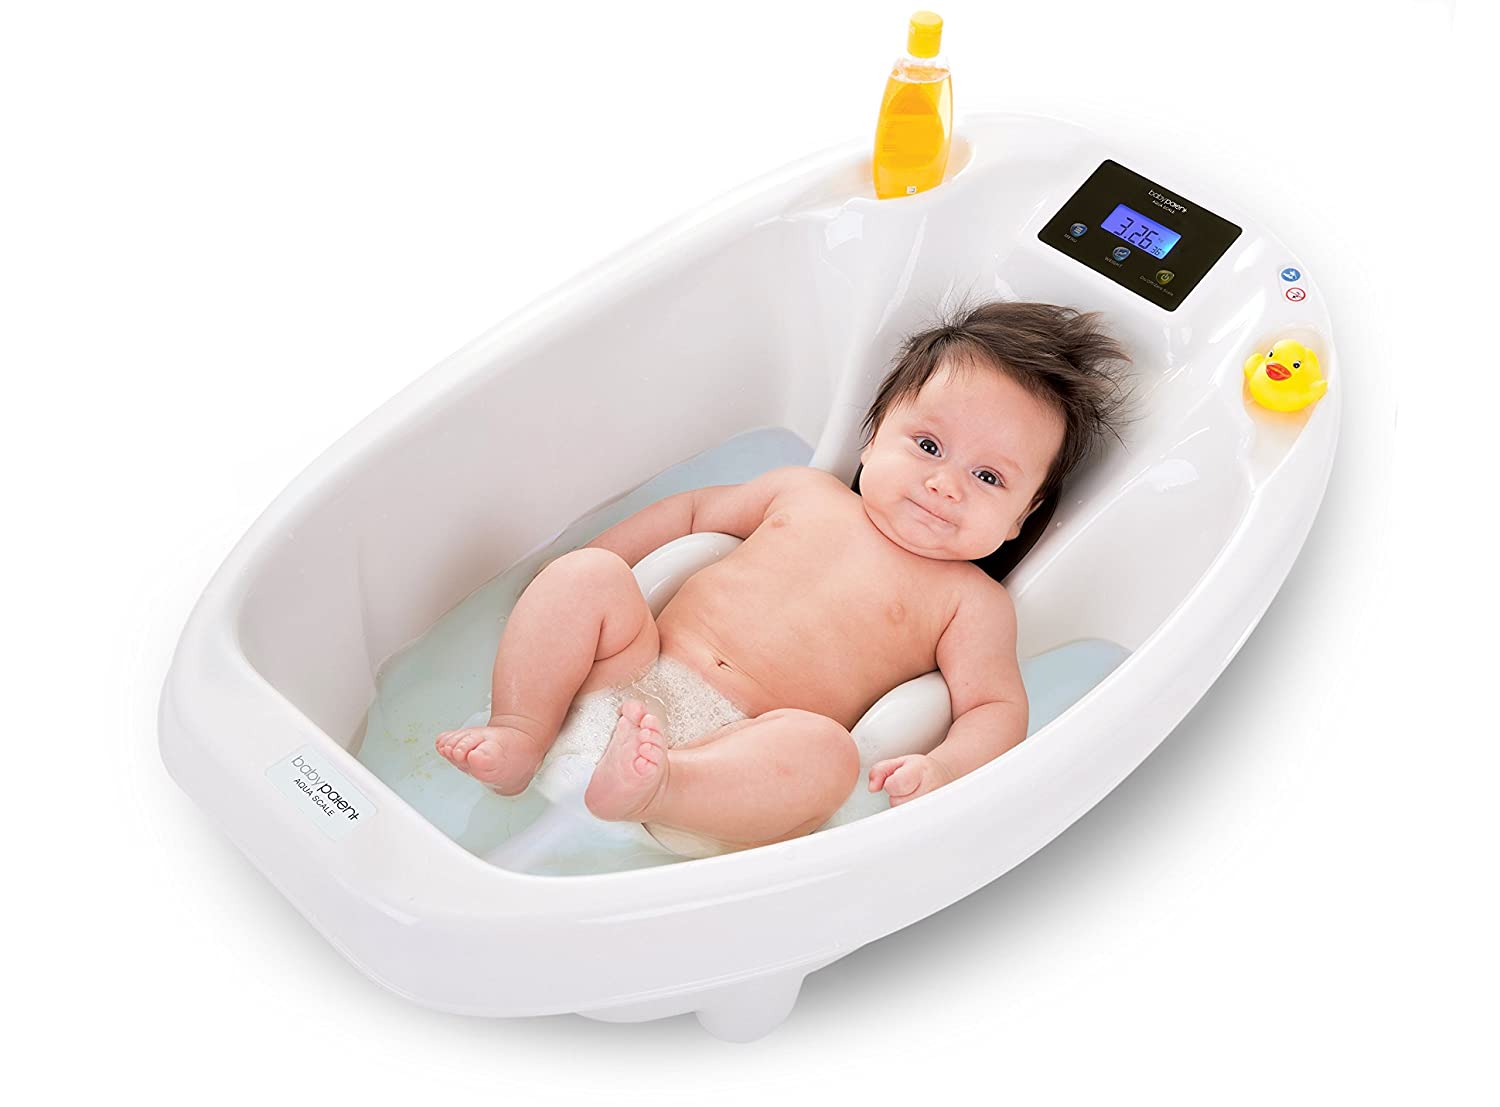 AquaScale 3-in-1 Digital Scale, Water Thermometer and Infant Tub - image 1 of 5